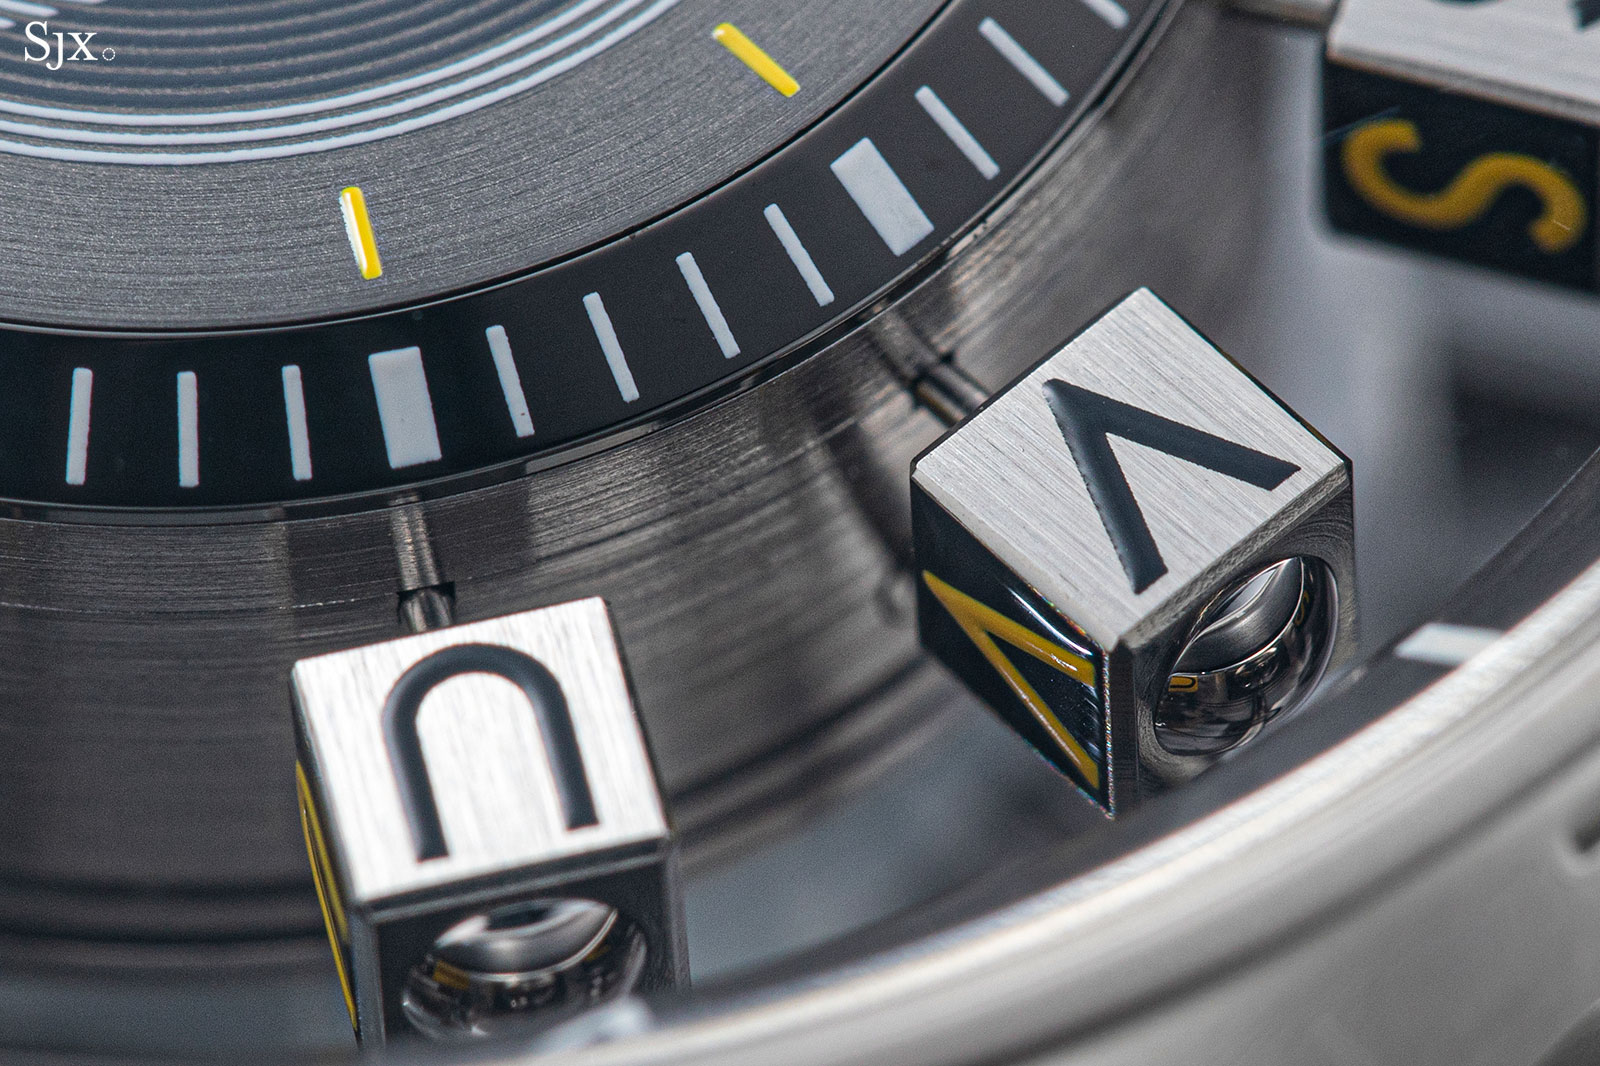 Louis Vuitton Tambour Spin Time Air Quantum: “Lit” Non-Traditional High  Watchmaking - Quill & Pad